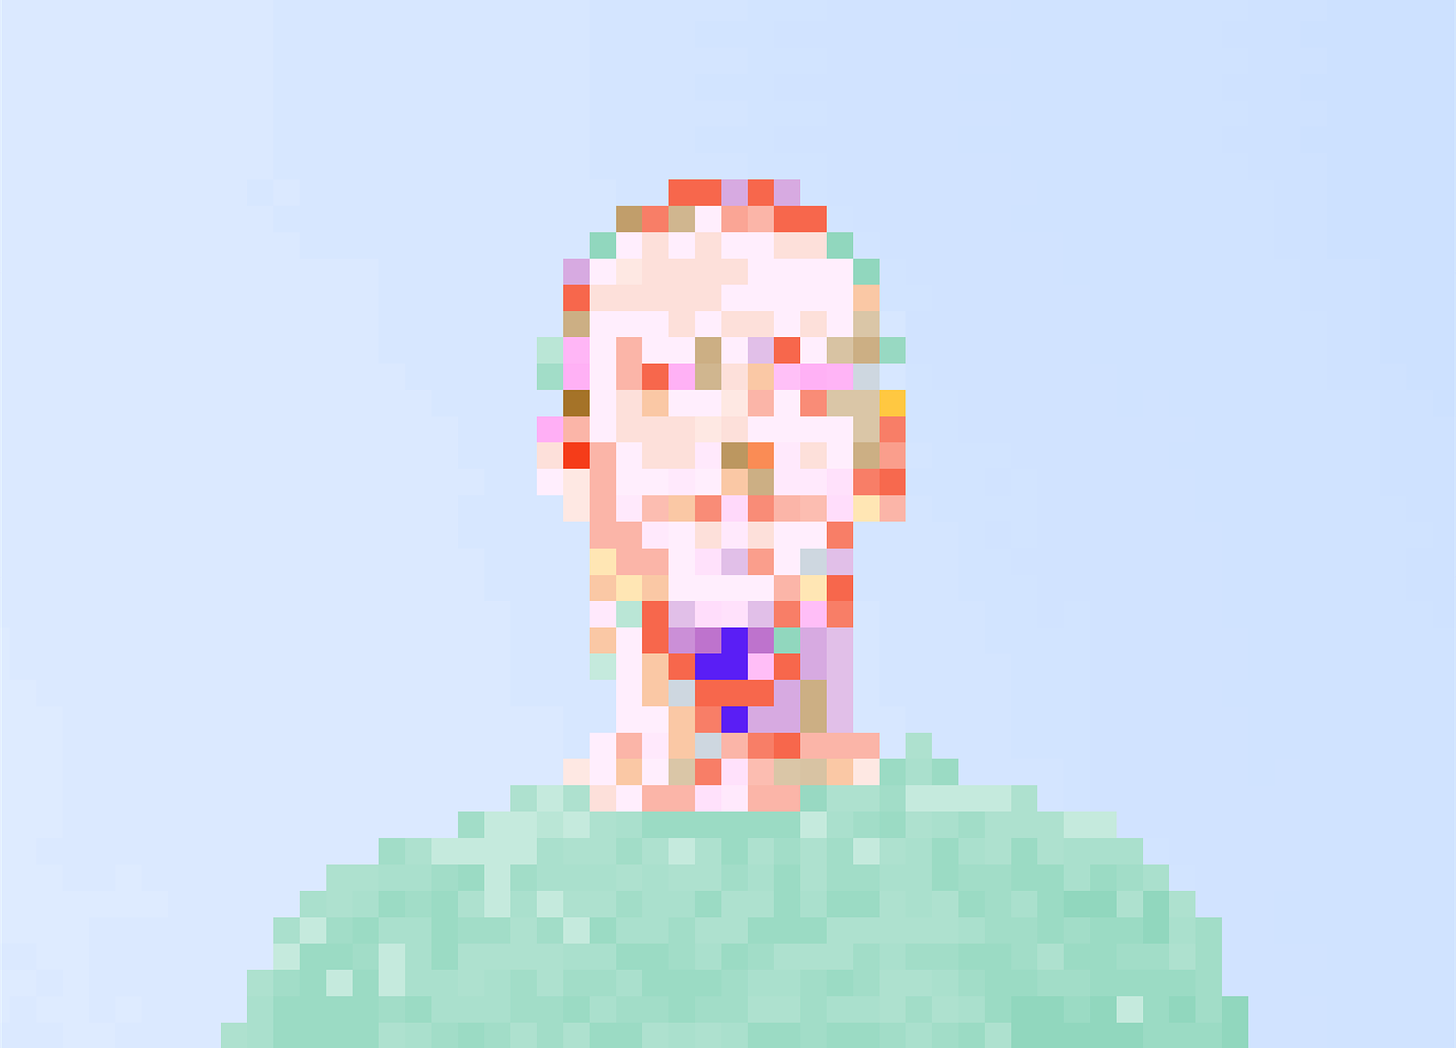 A very pixelated portrait of Mark Zuckerberg, made of colorful blocks.